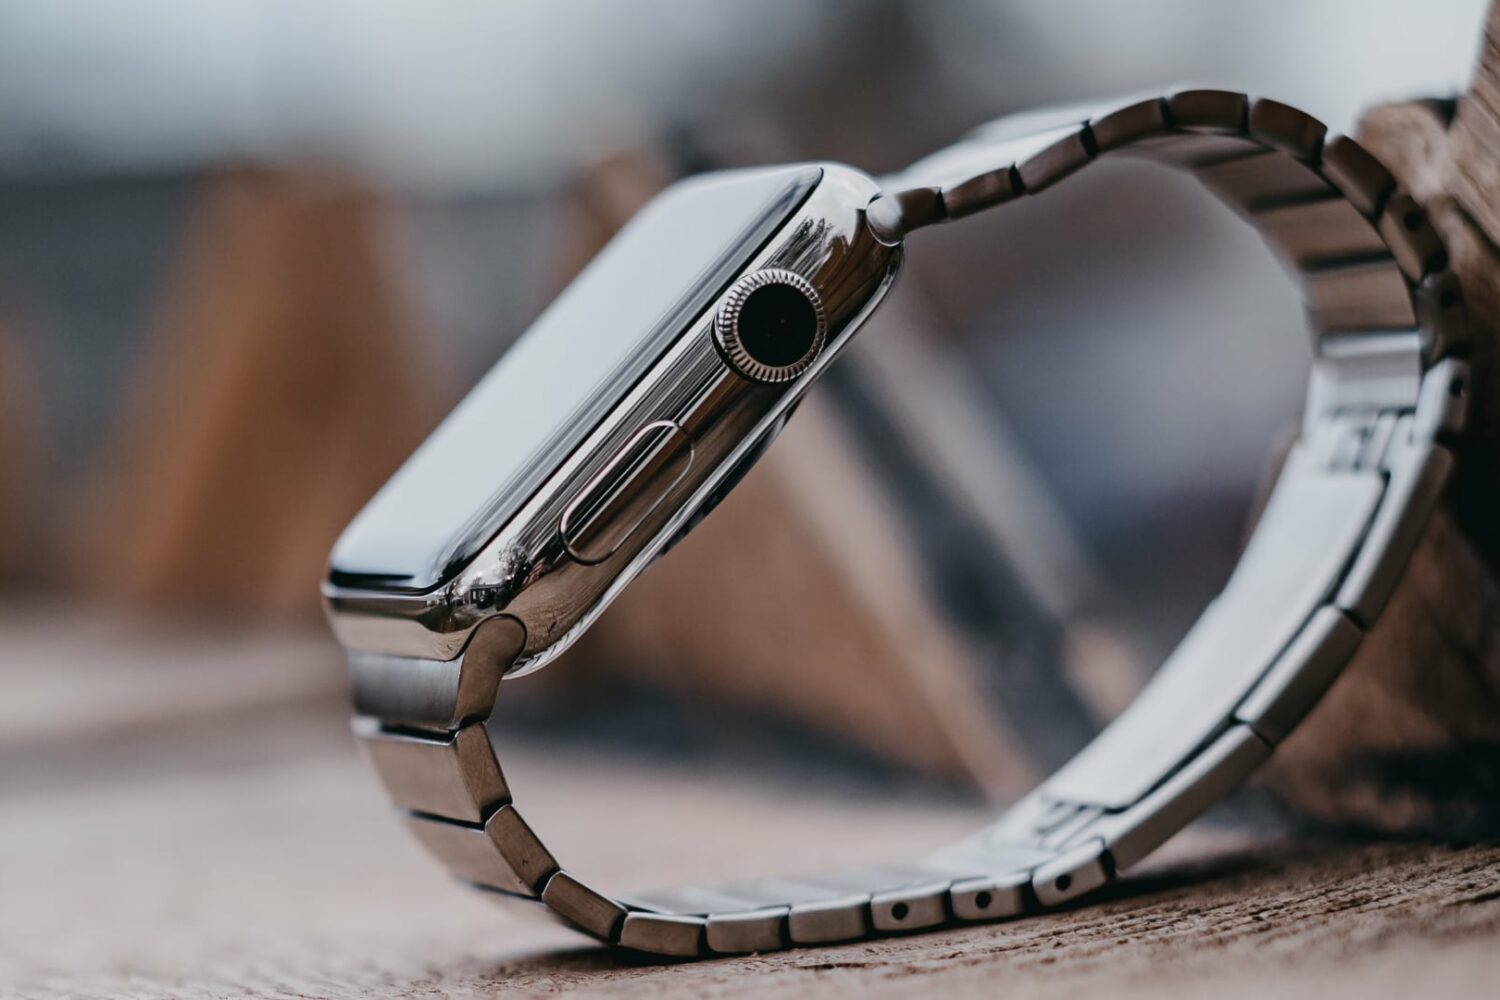 Apple Watch Series 4 with the stainless steel band